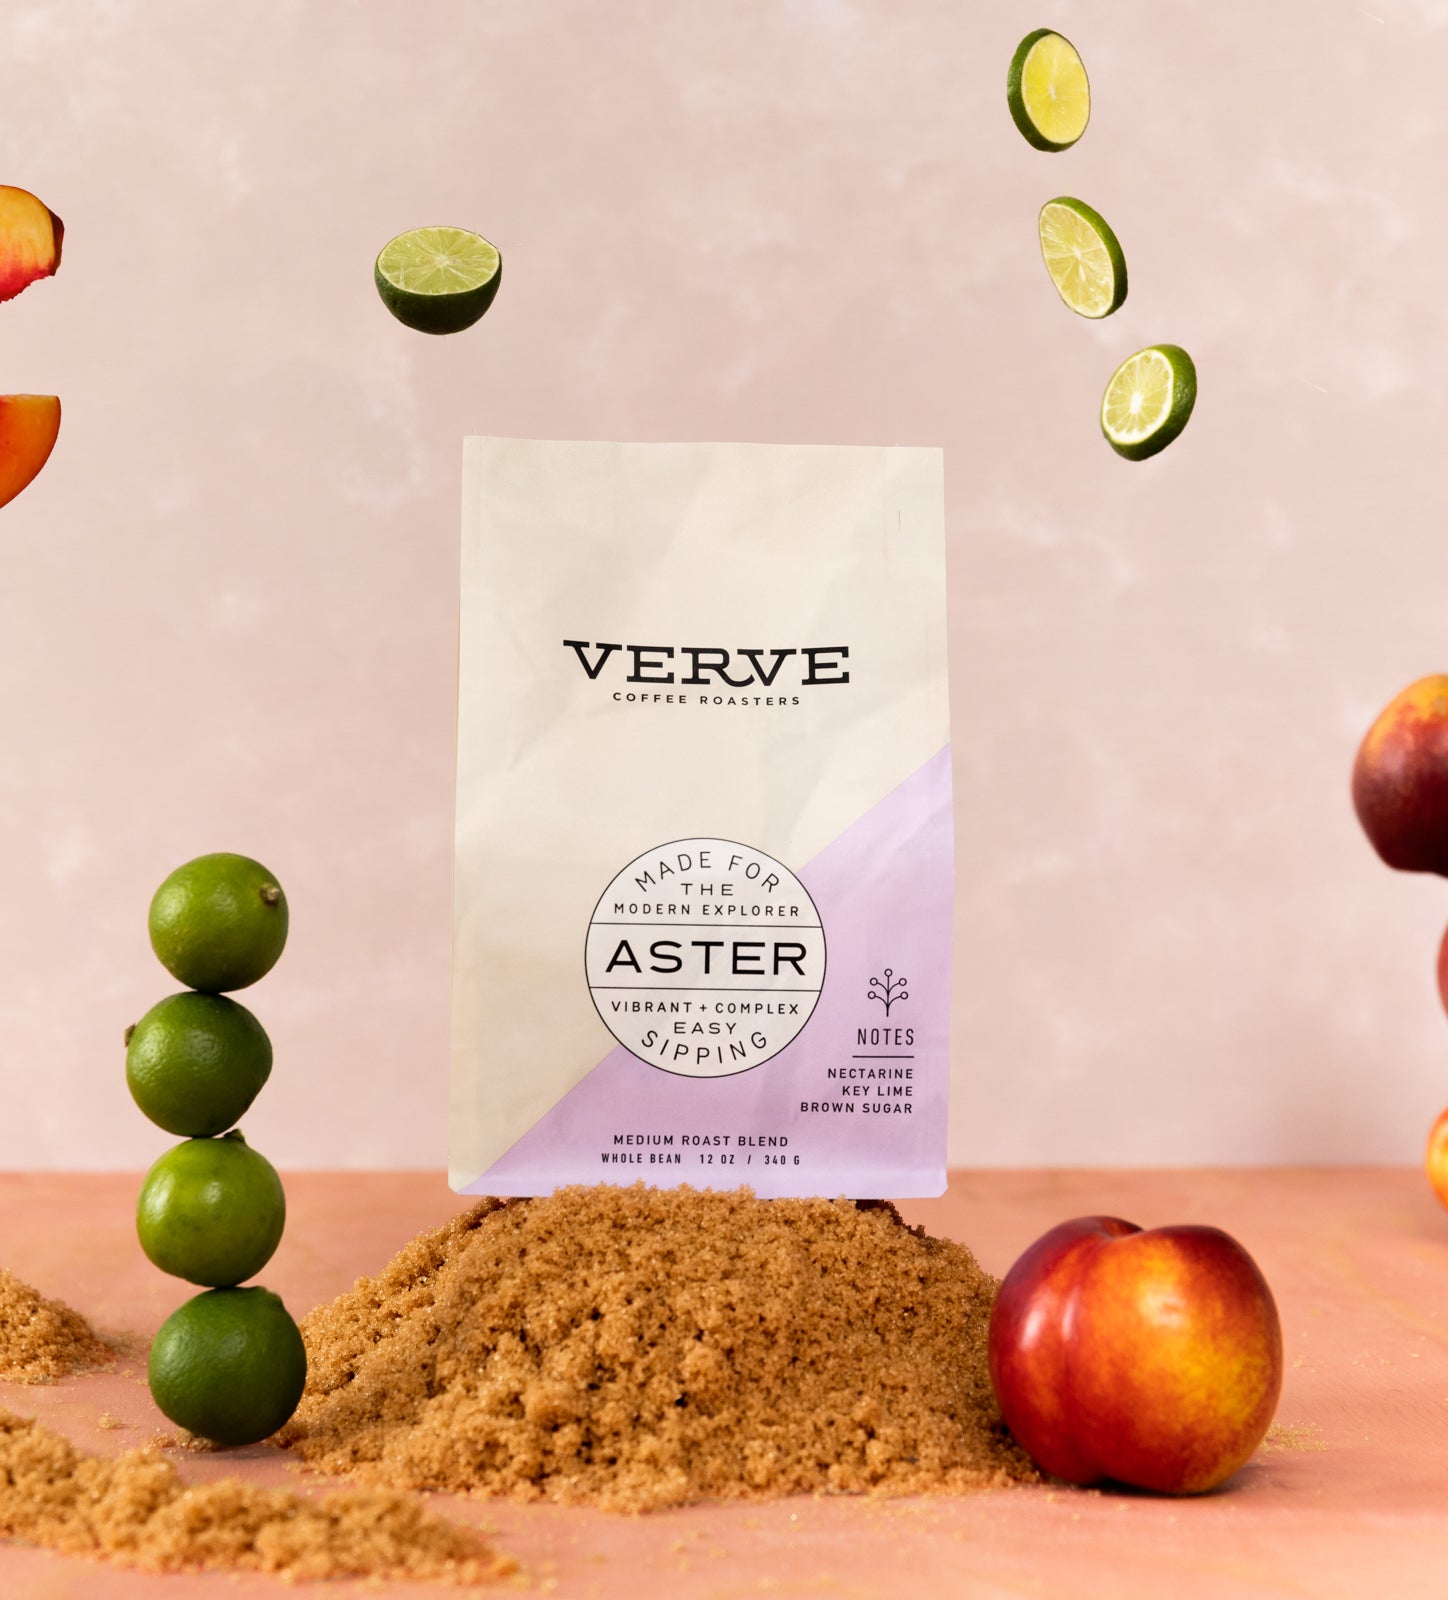 Aster Blend Whole Bean Tasting notes